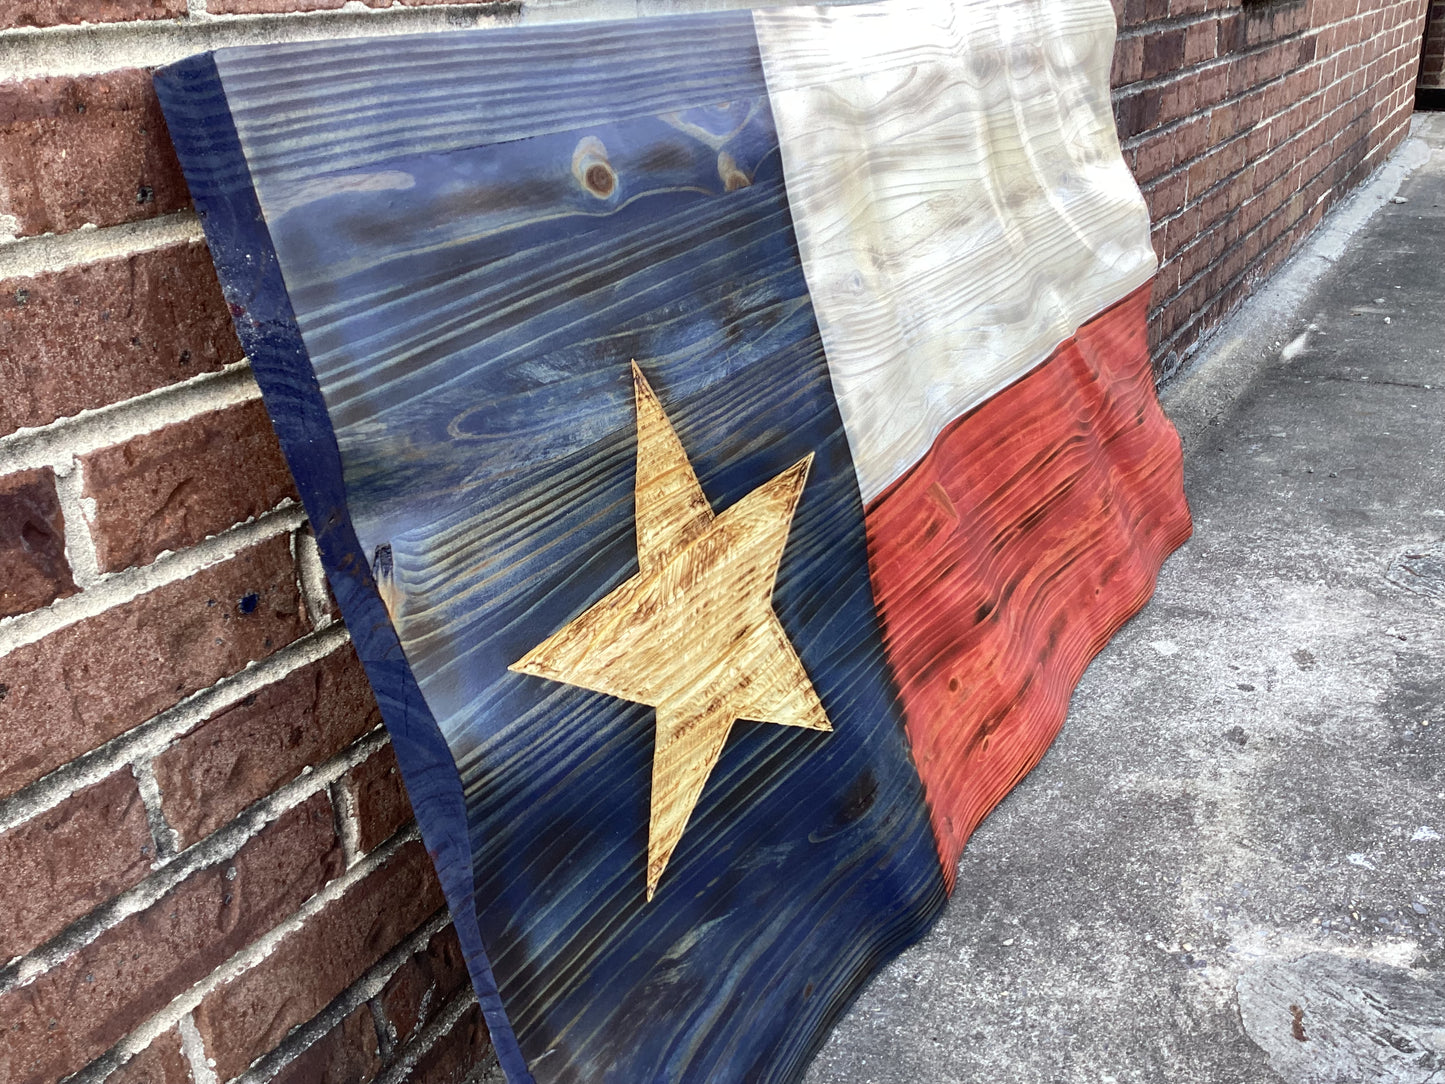 Waving Wooden Rustic Texas Lone Star State Flag